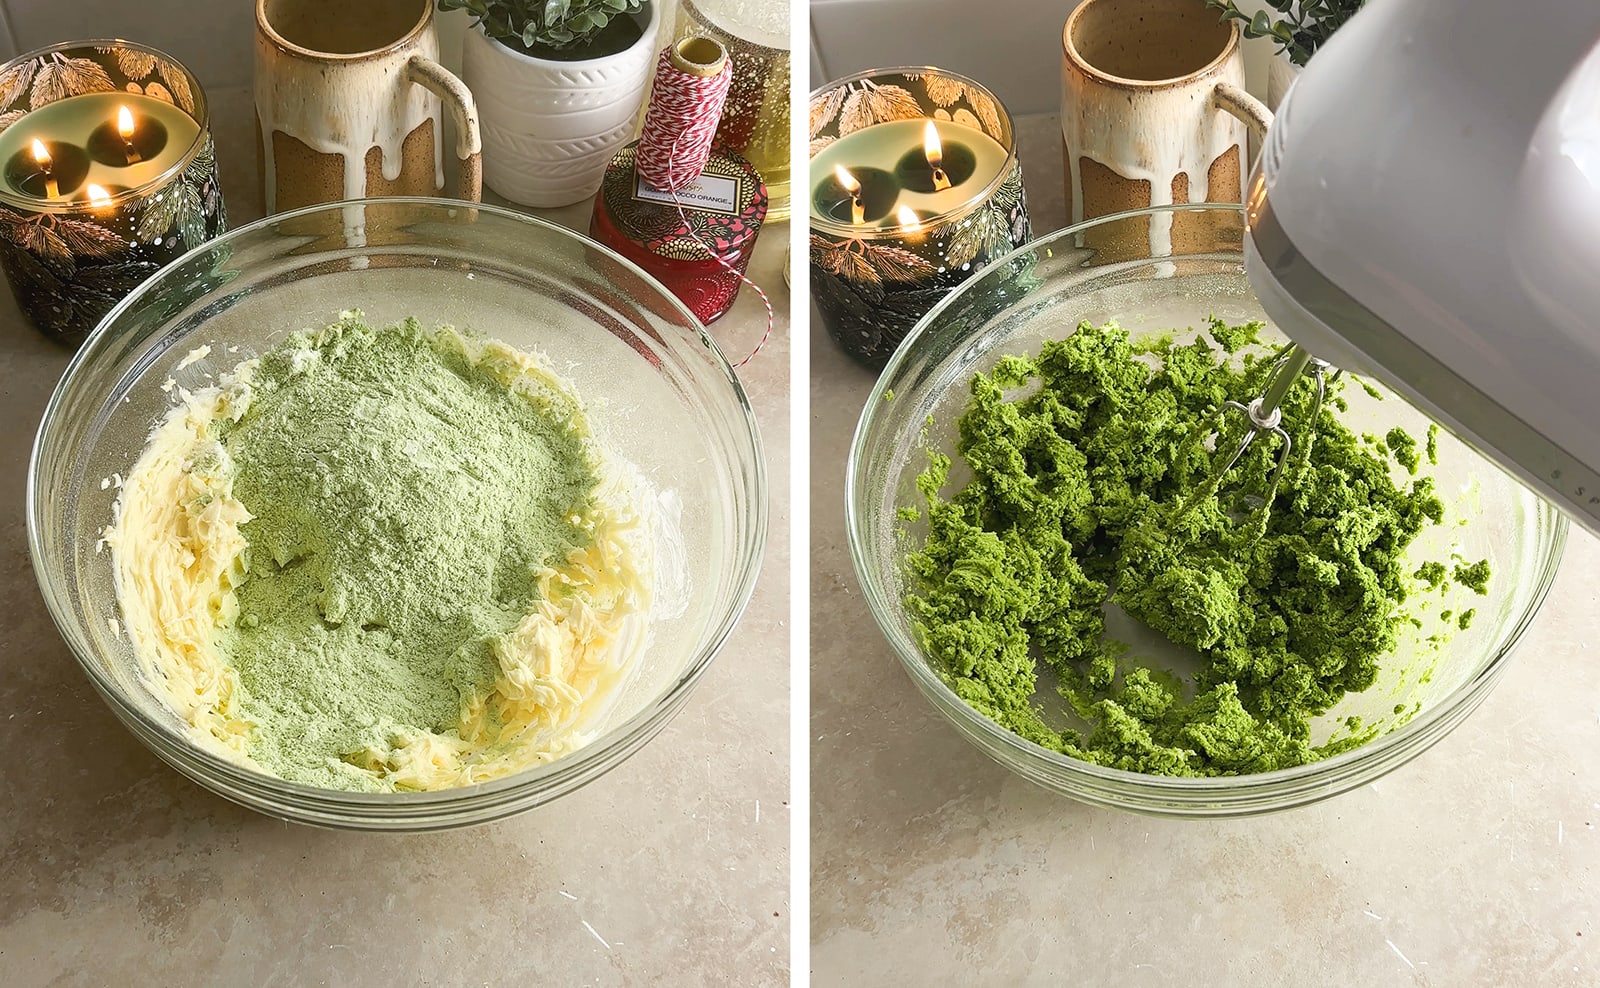 Left to right: flour mixture in a bowl of wet mixture, mixing matcha cookie dough in a bowl.